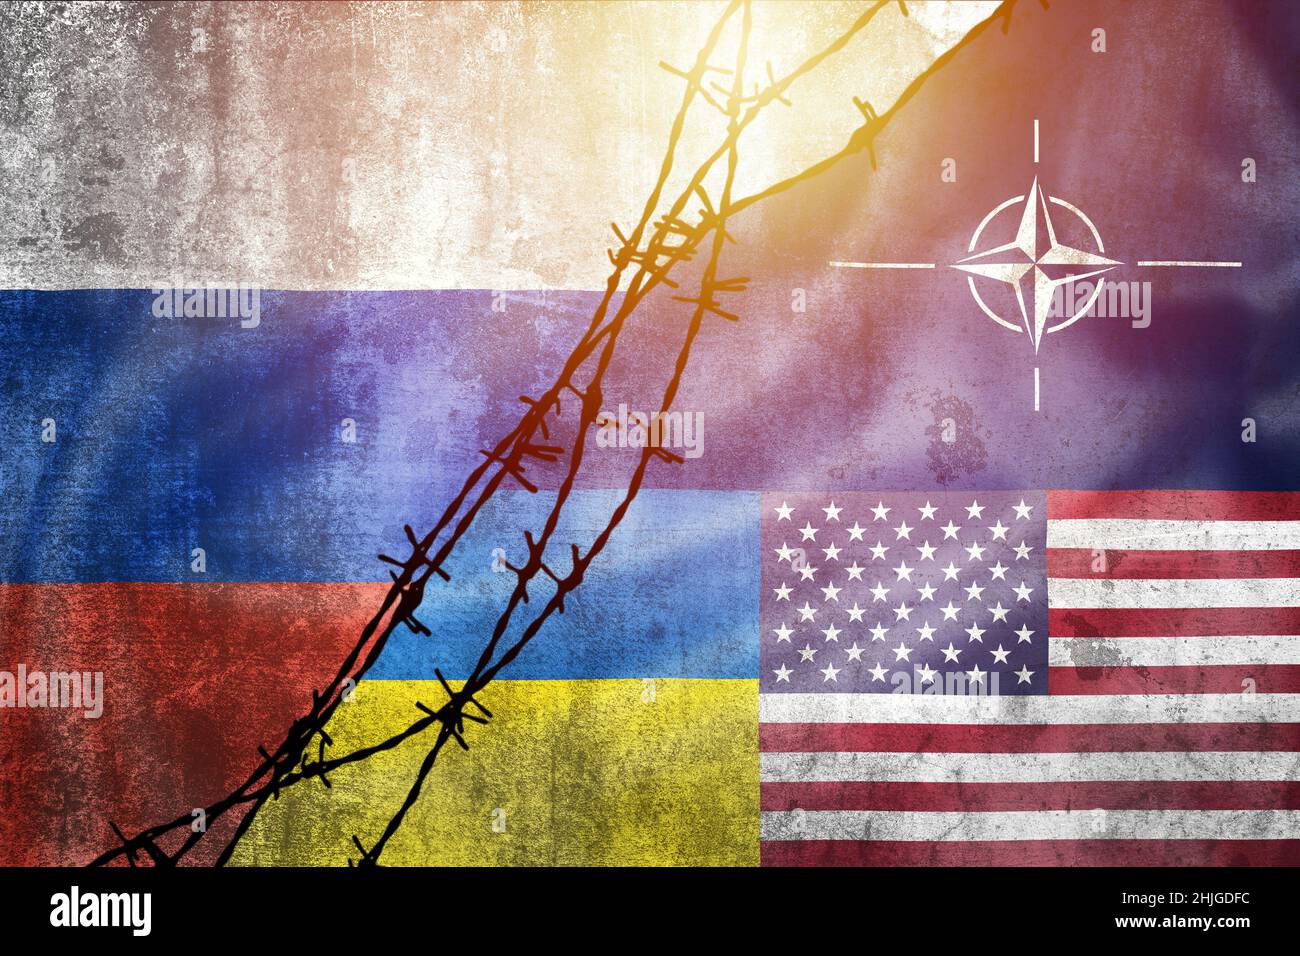 Grunge flags of Russian Federation, NATO, USA and Ukraine divided by barb wire sun haze illustration, concept of tense relations between west and Russ Stock Photo